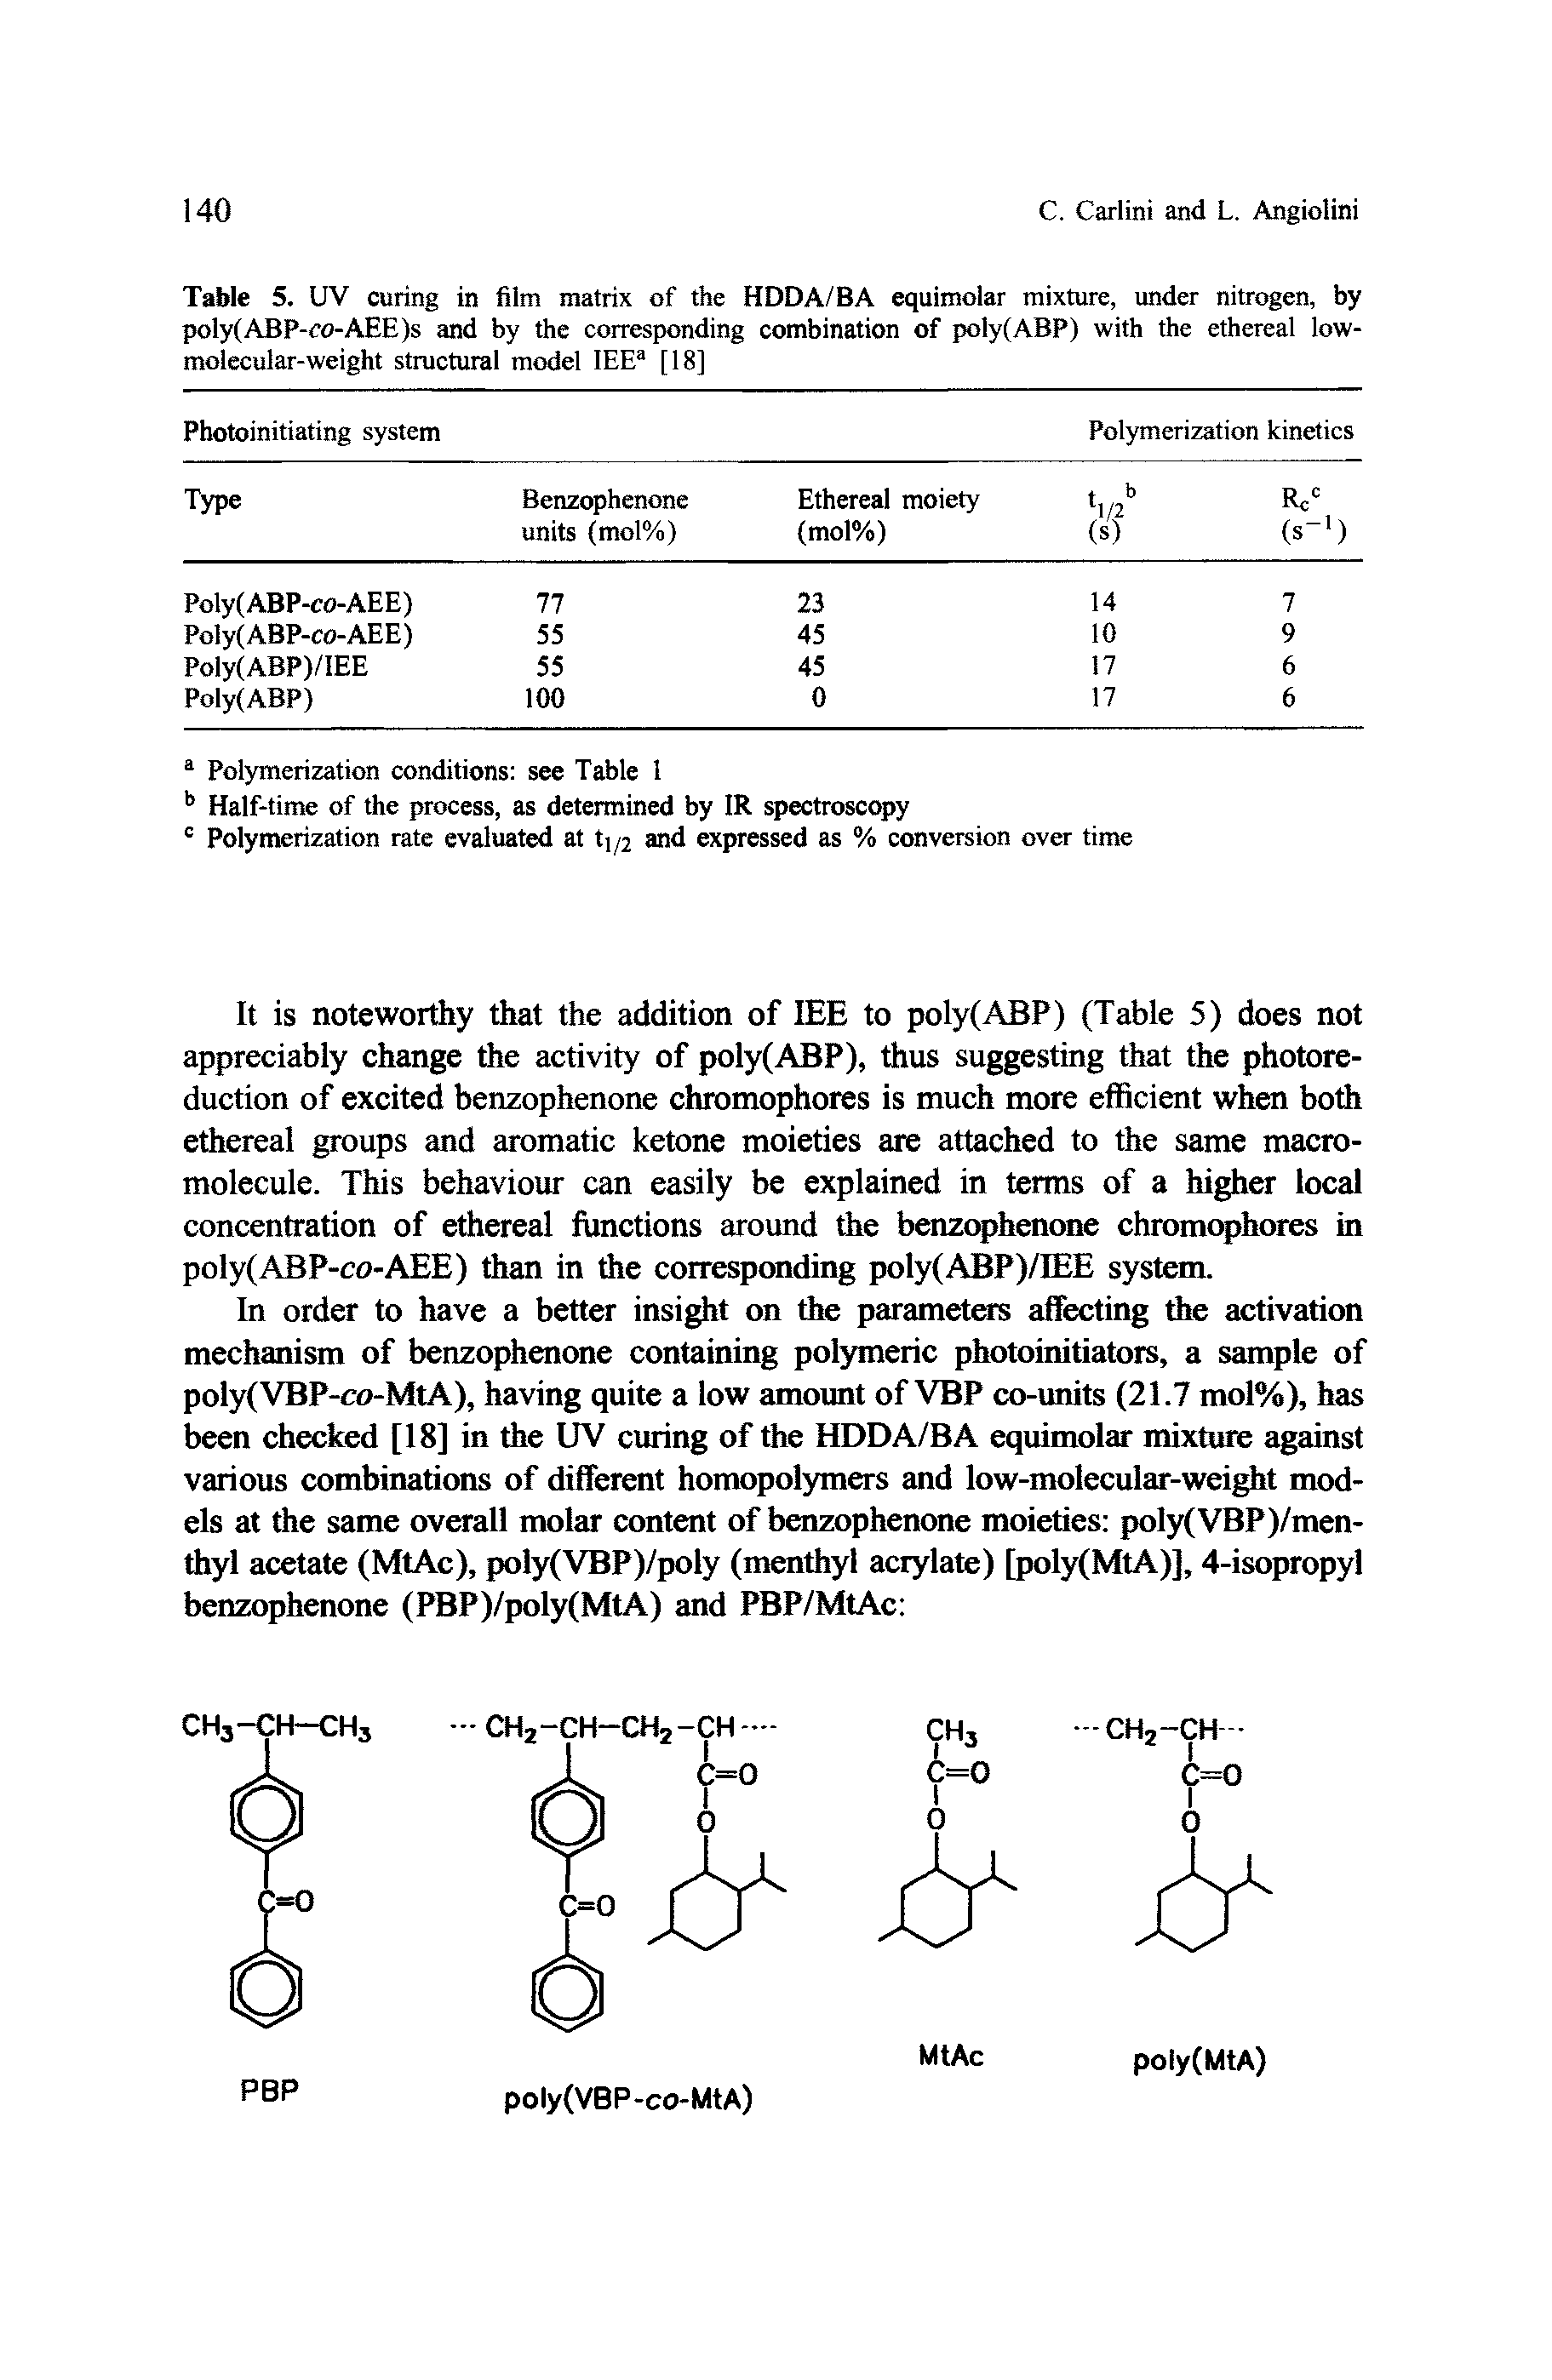 Table 5. UV curing in film matrix of the HDDA/BA equimolar mixture, under nitrogen, by poly(ABP-co-AEE)s and by the corresponding combination of poly(ABP) with the ethereal low-molecular-weight structural model IEE [18]...